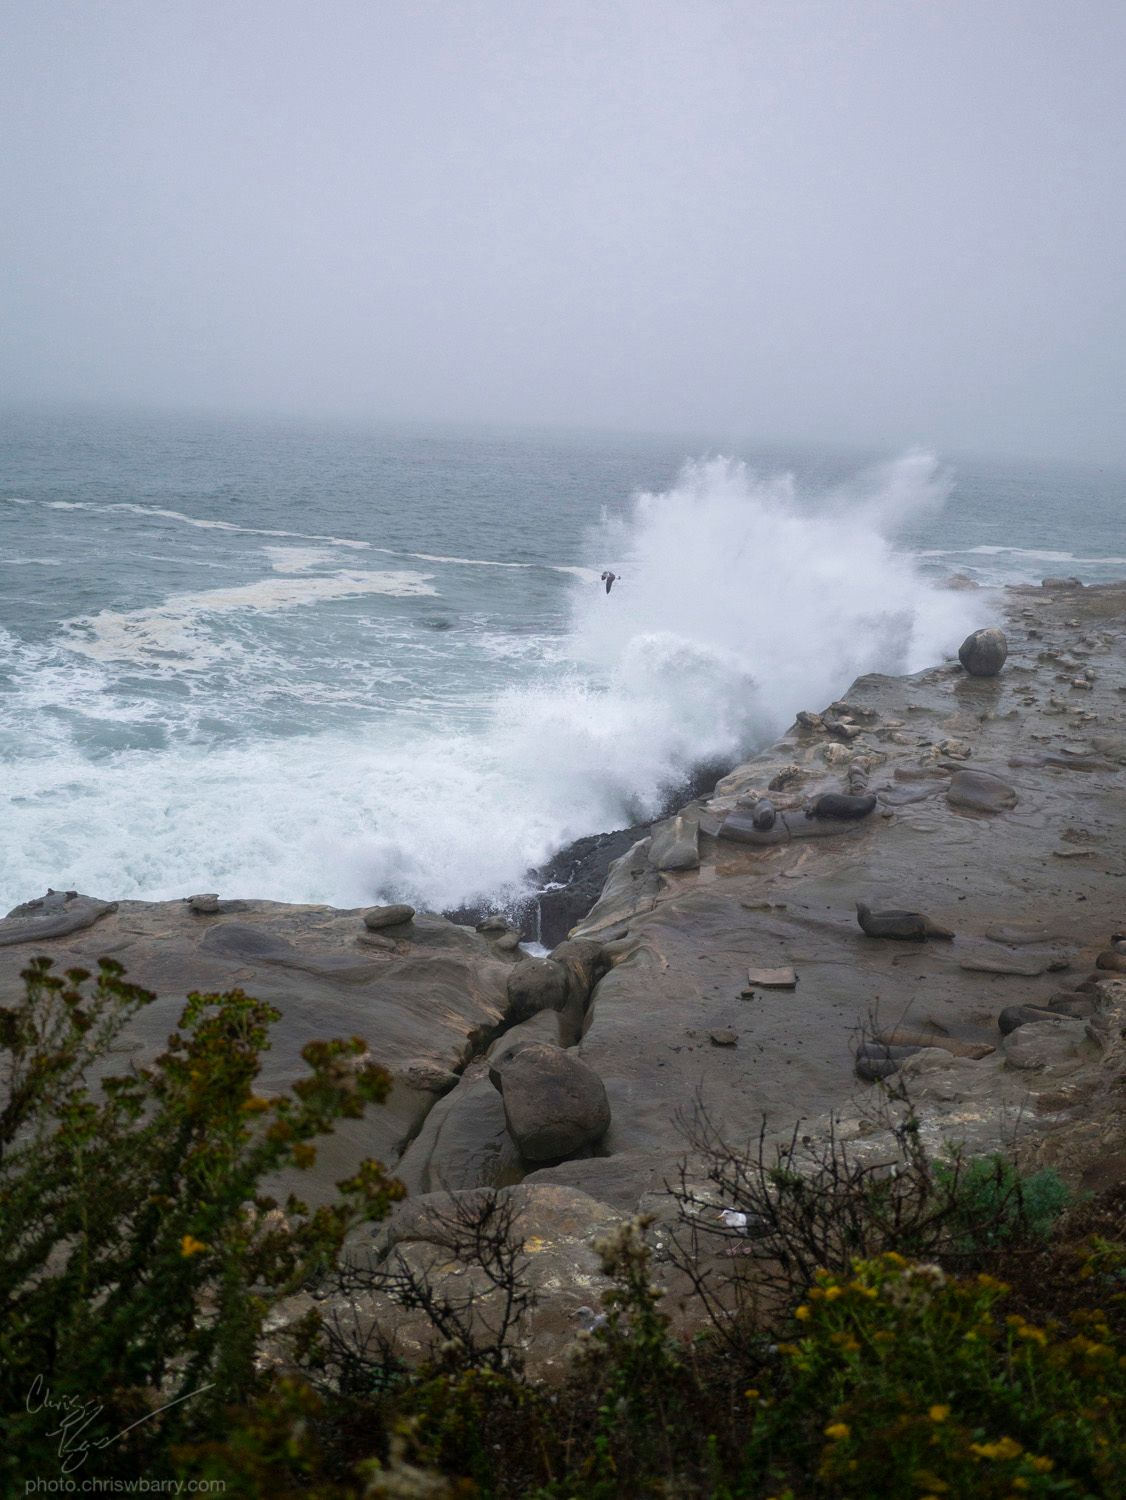 A photo of spray from waves crashing on a rocky shoreline. In the foreground, sea lions that are a similar brown to the rocks